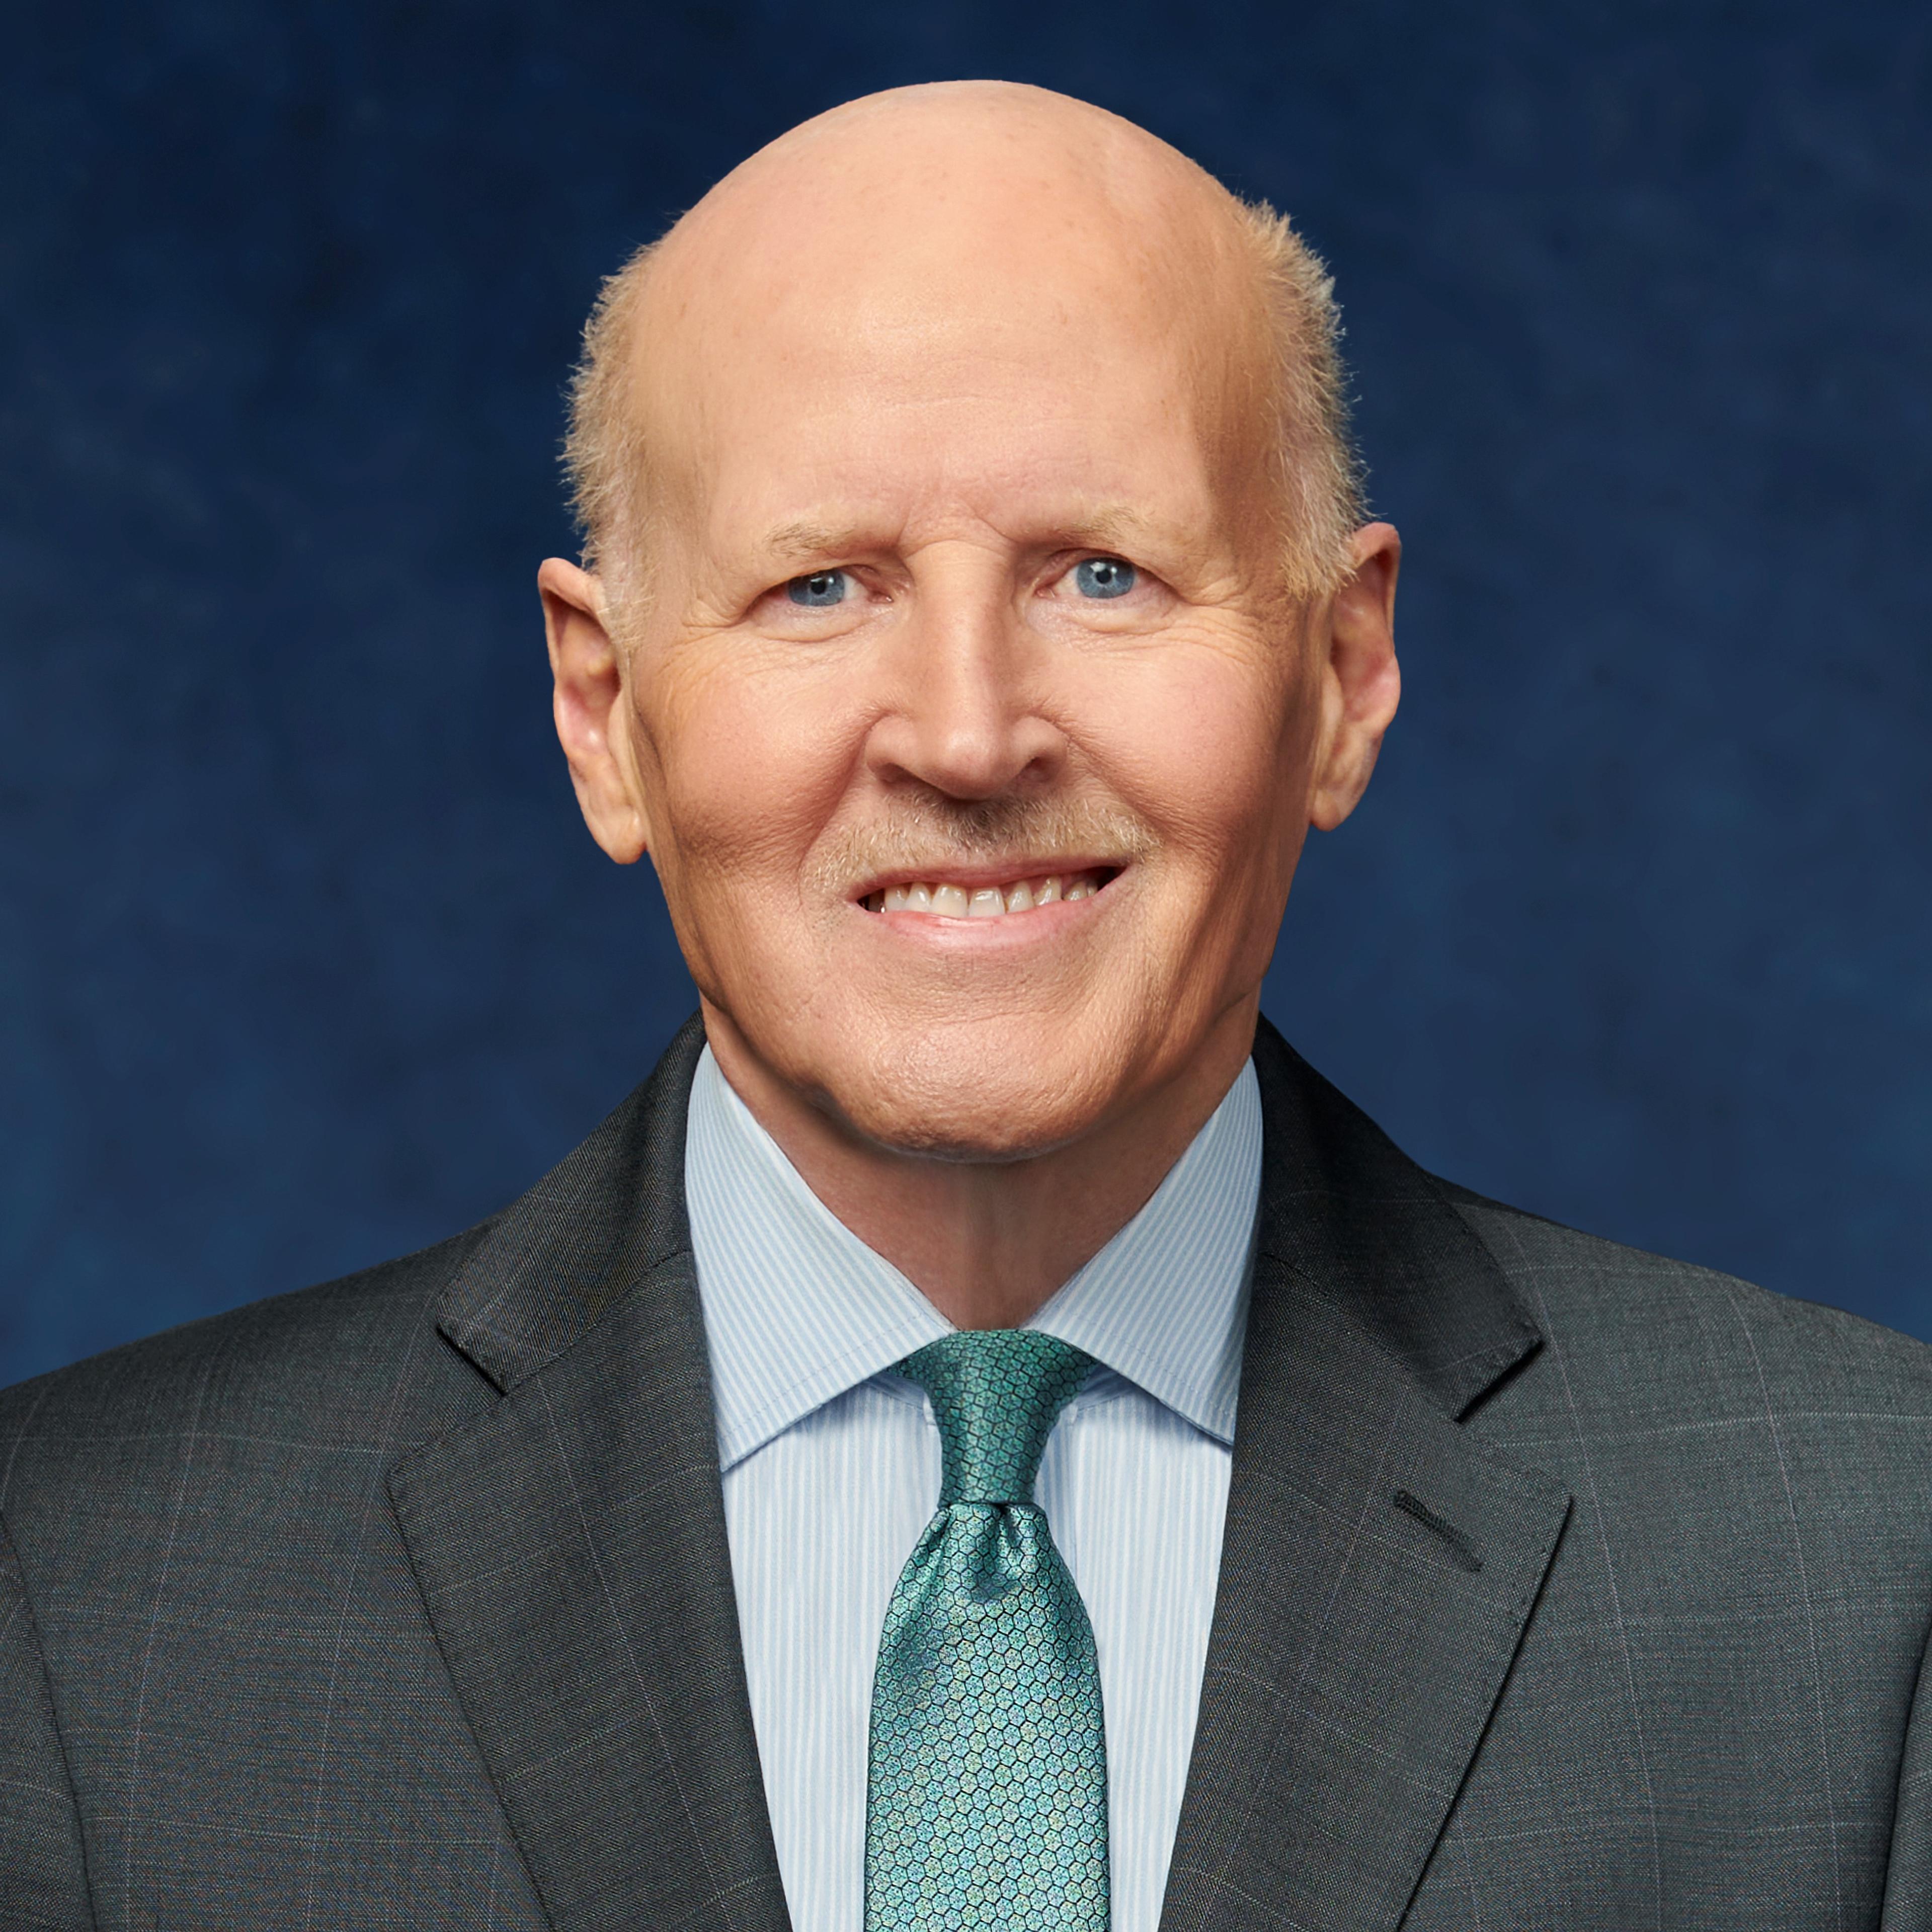 Gregory A. Sudderth is chairman of the board at Blue Cross Blue Shield of Michigan.